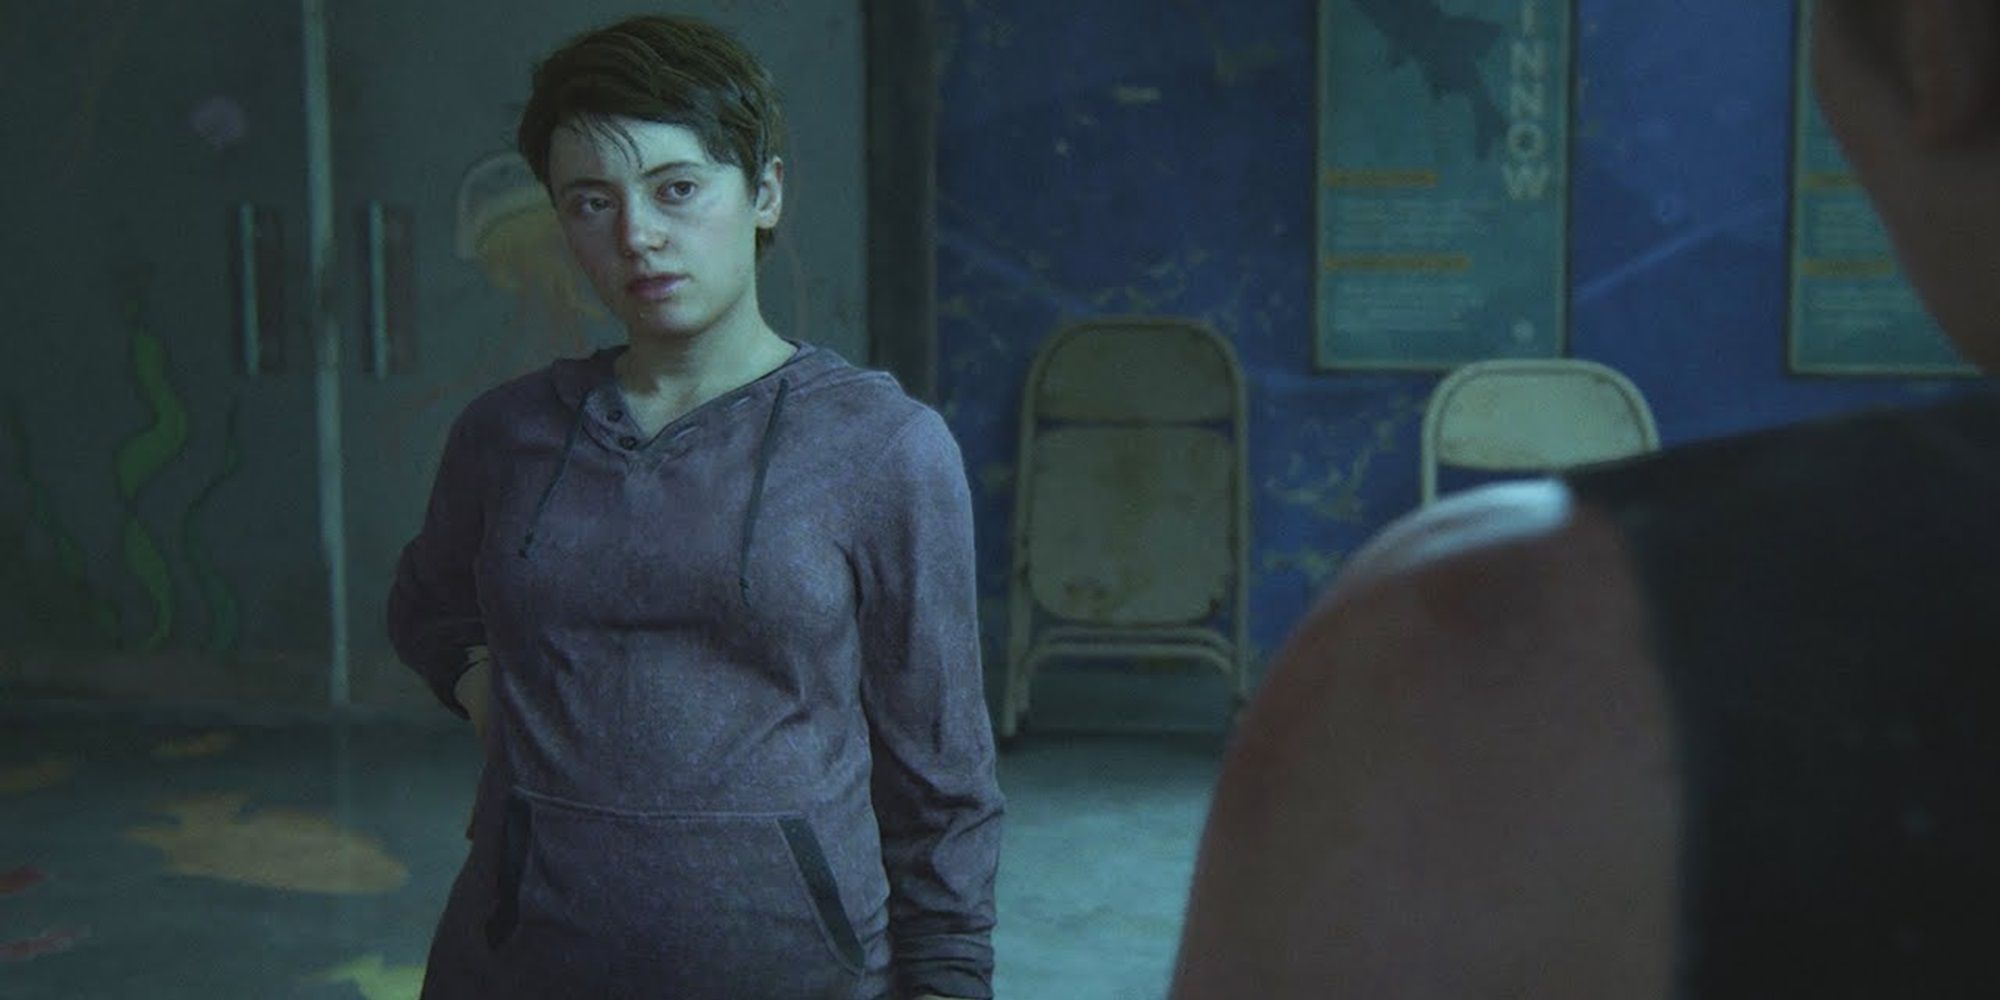 Mel confronts Abby in The Last of Us Part II